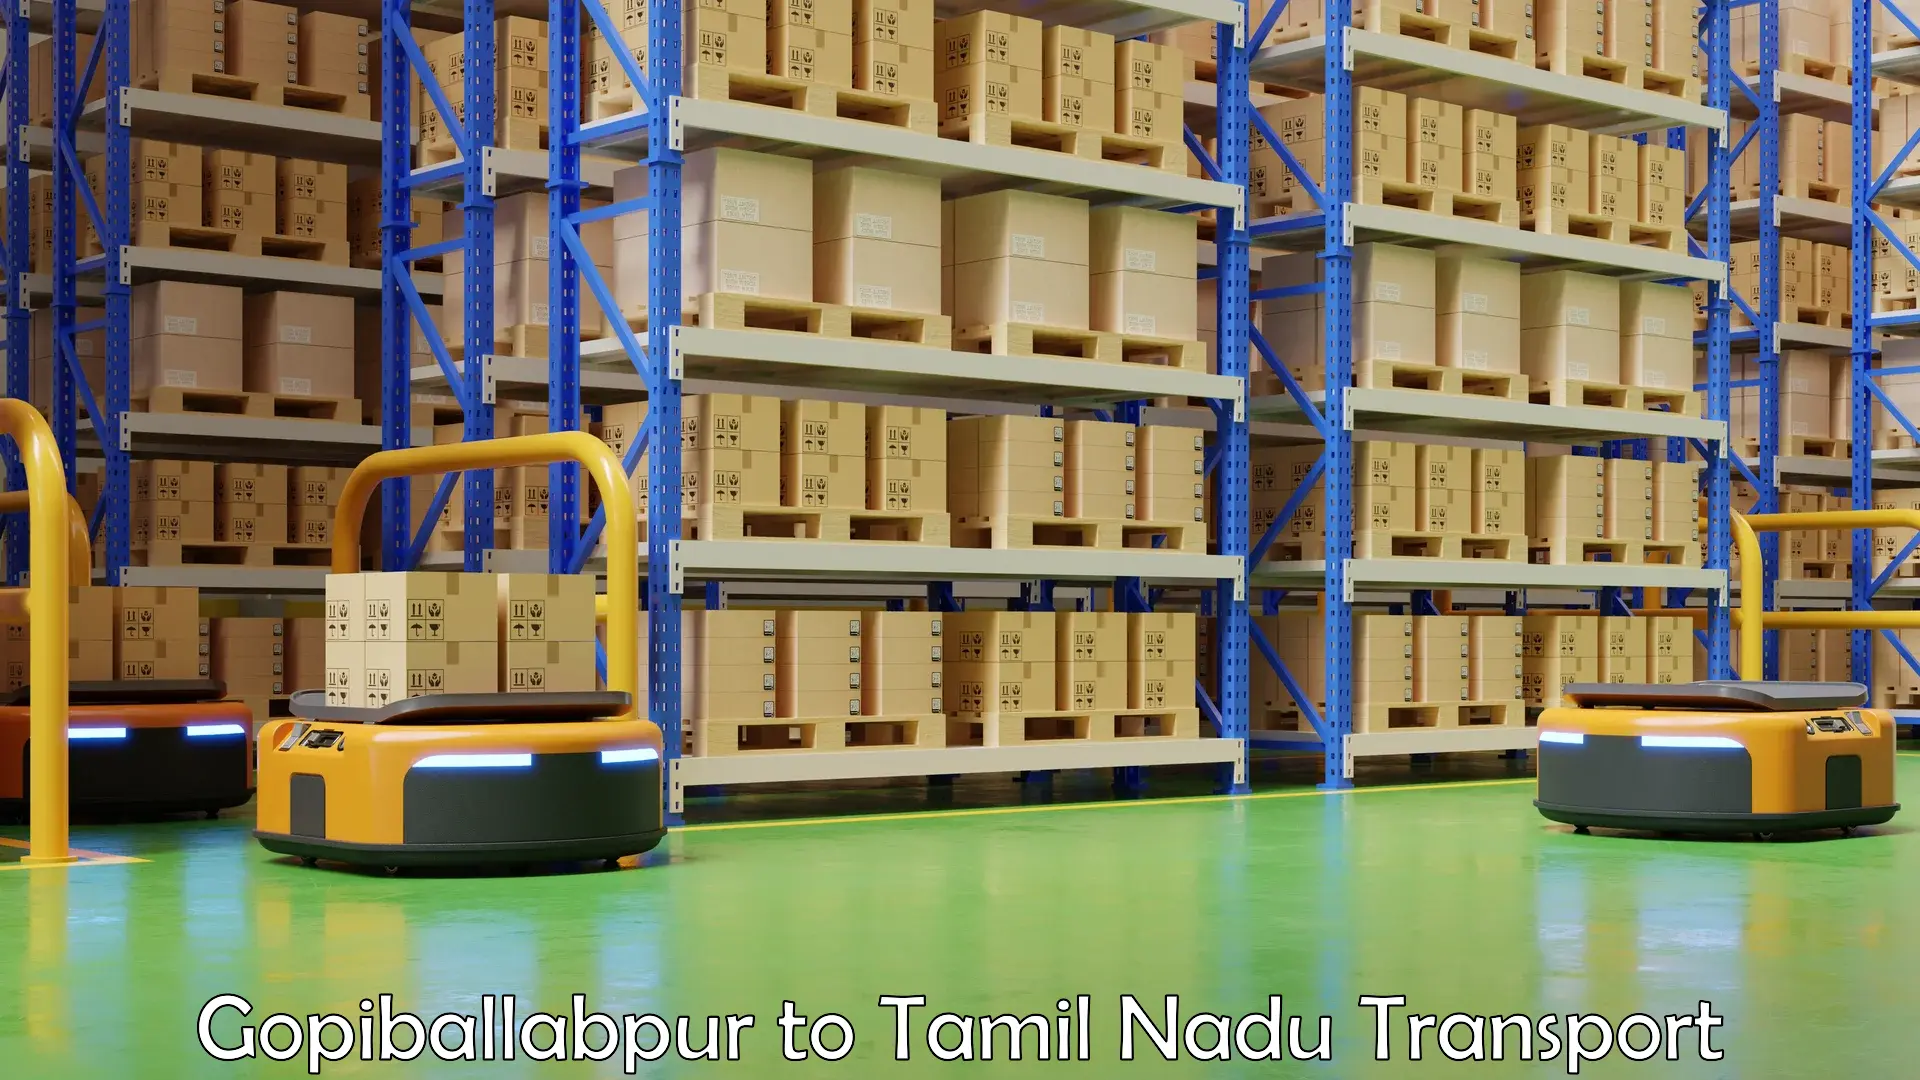 Air freight transport services in Gopiballabpur to Sriperumbudur